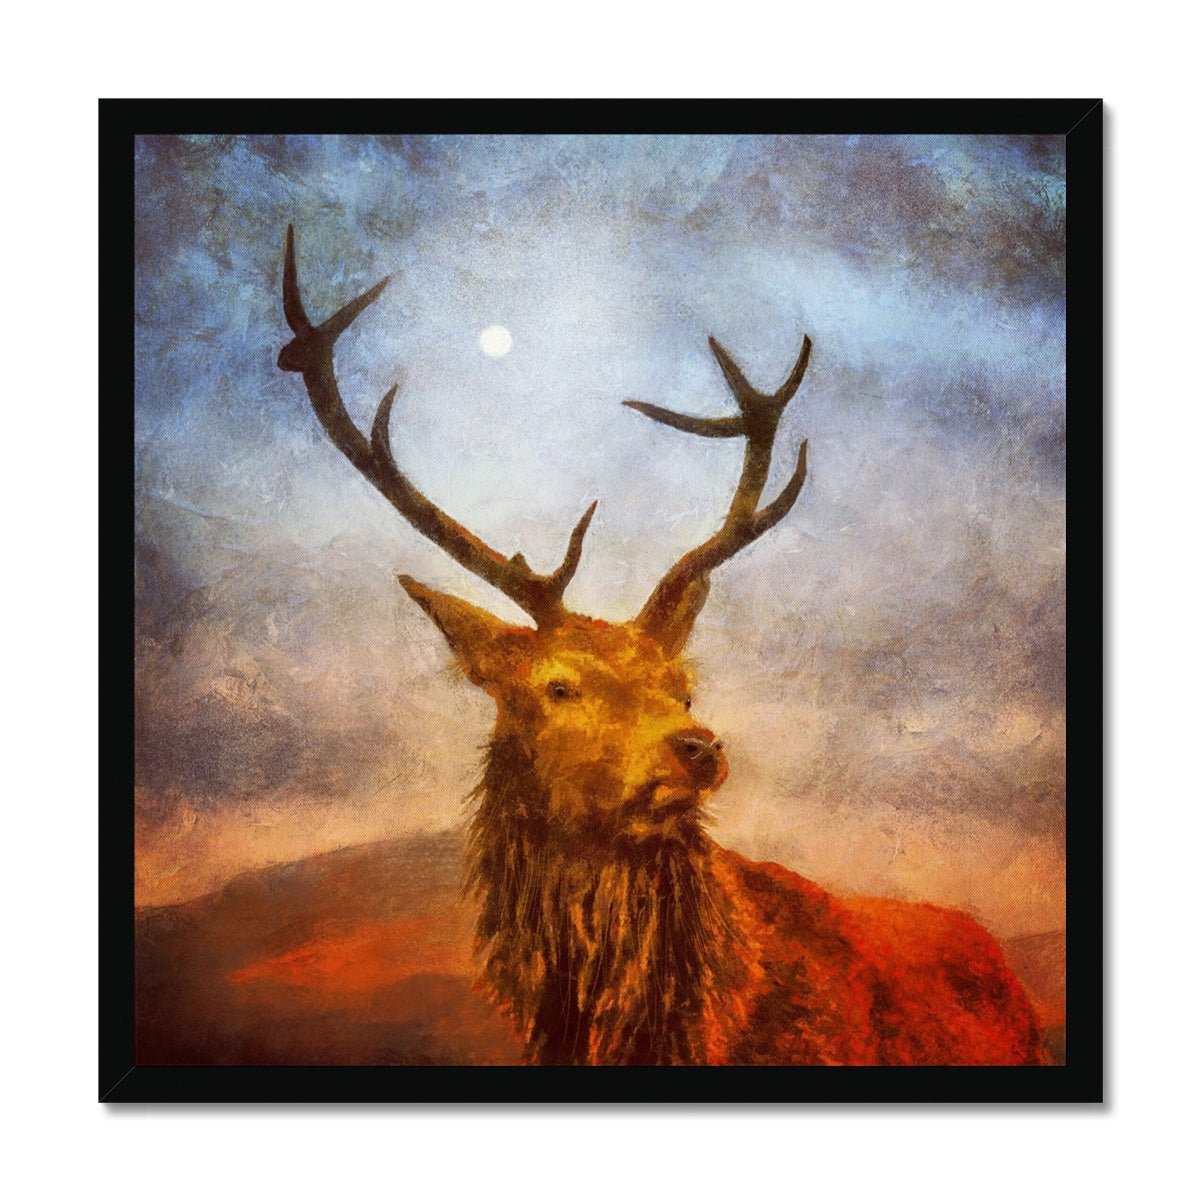 A Moonlit Highland Stag Painting | Framed Prints From Scotland-Framed Prints-Scottish Highlands & Lowlands Art Gallery-20"x20"-Black Frame-Paintings, Prints, Homeware, Art Gifts From Scotland By Scottish Artist Kevin Hunter